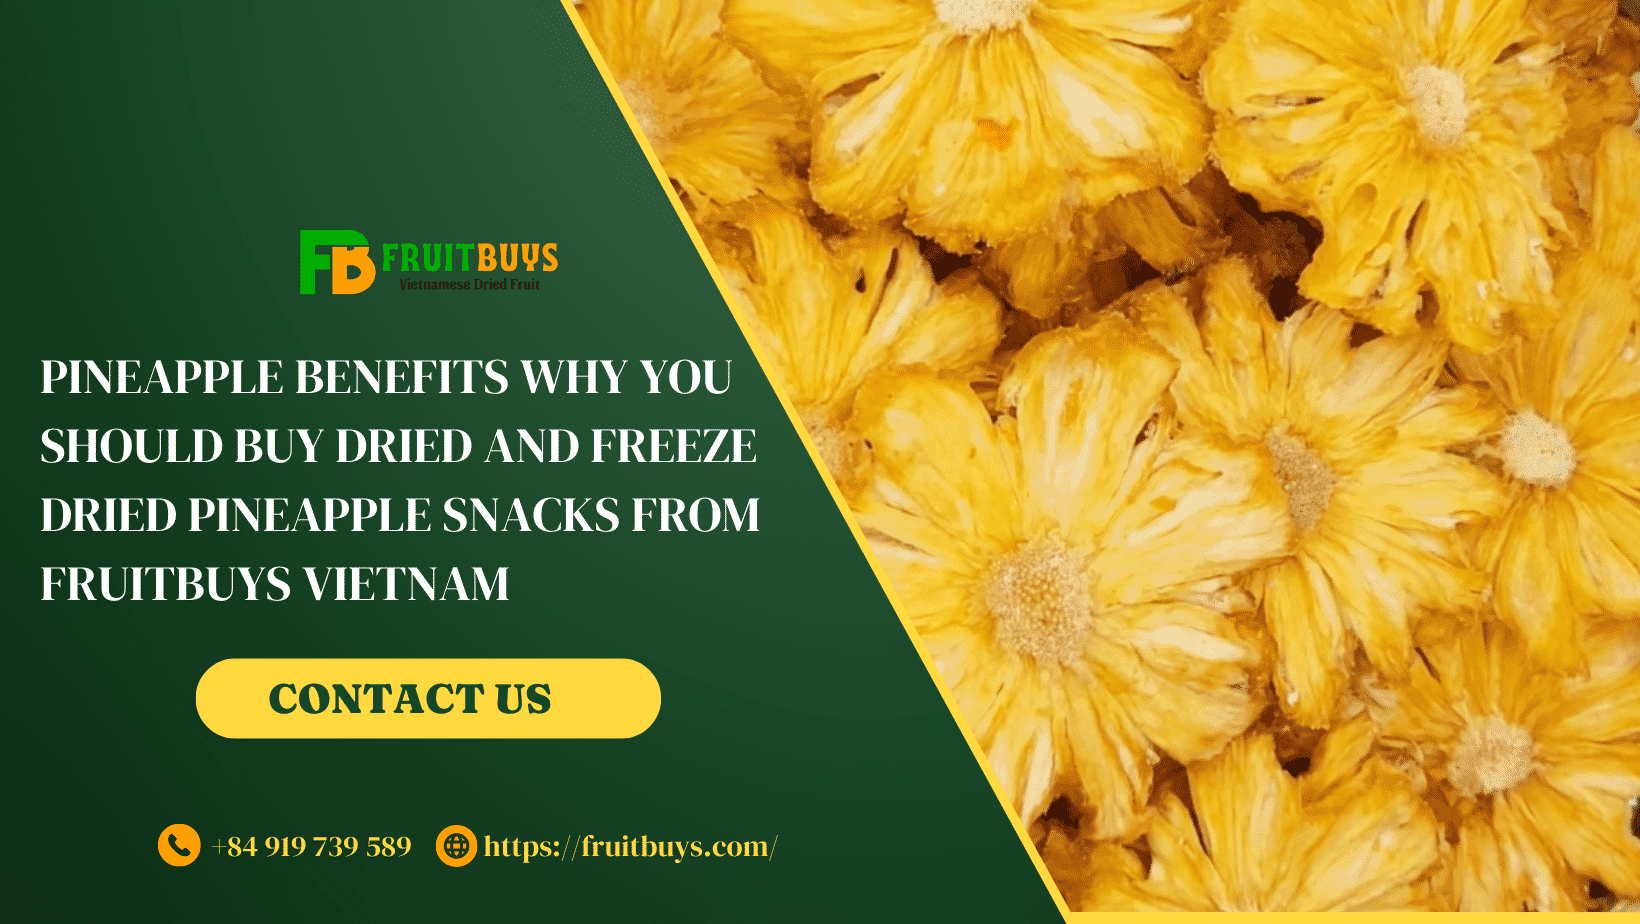 FruitBuys Vietnam Pineapple Benefits Why You Should Buy Dried And Freeze Dried Pineapple Snacks From FruitBuys Vietnam